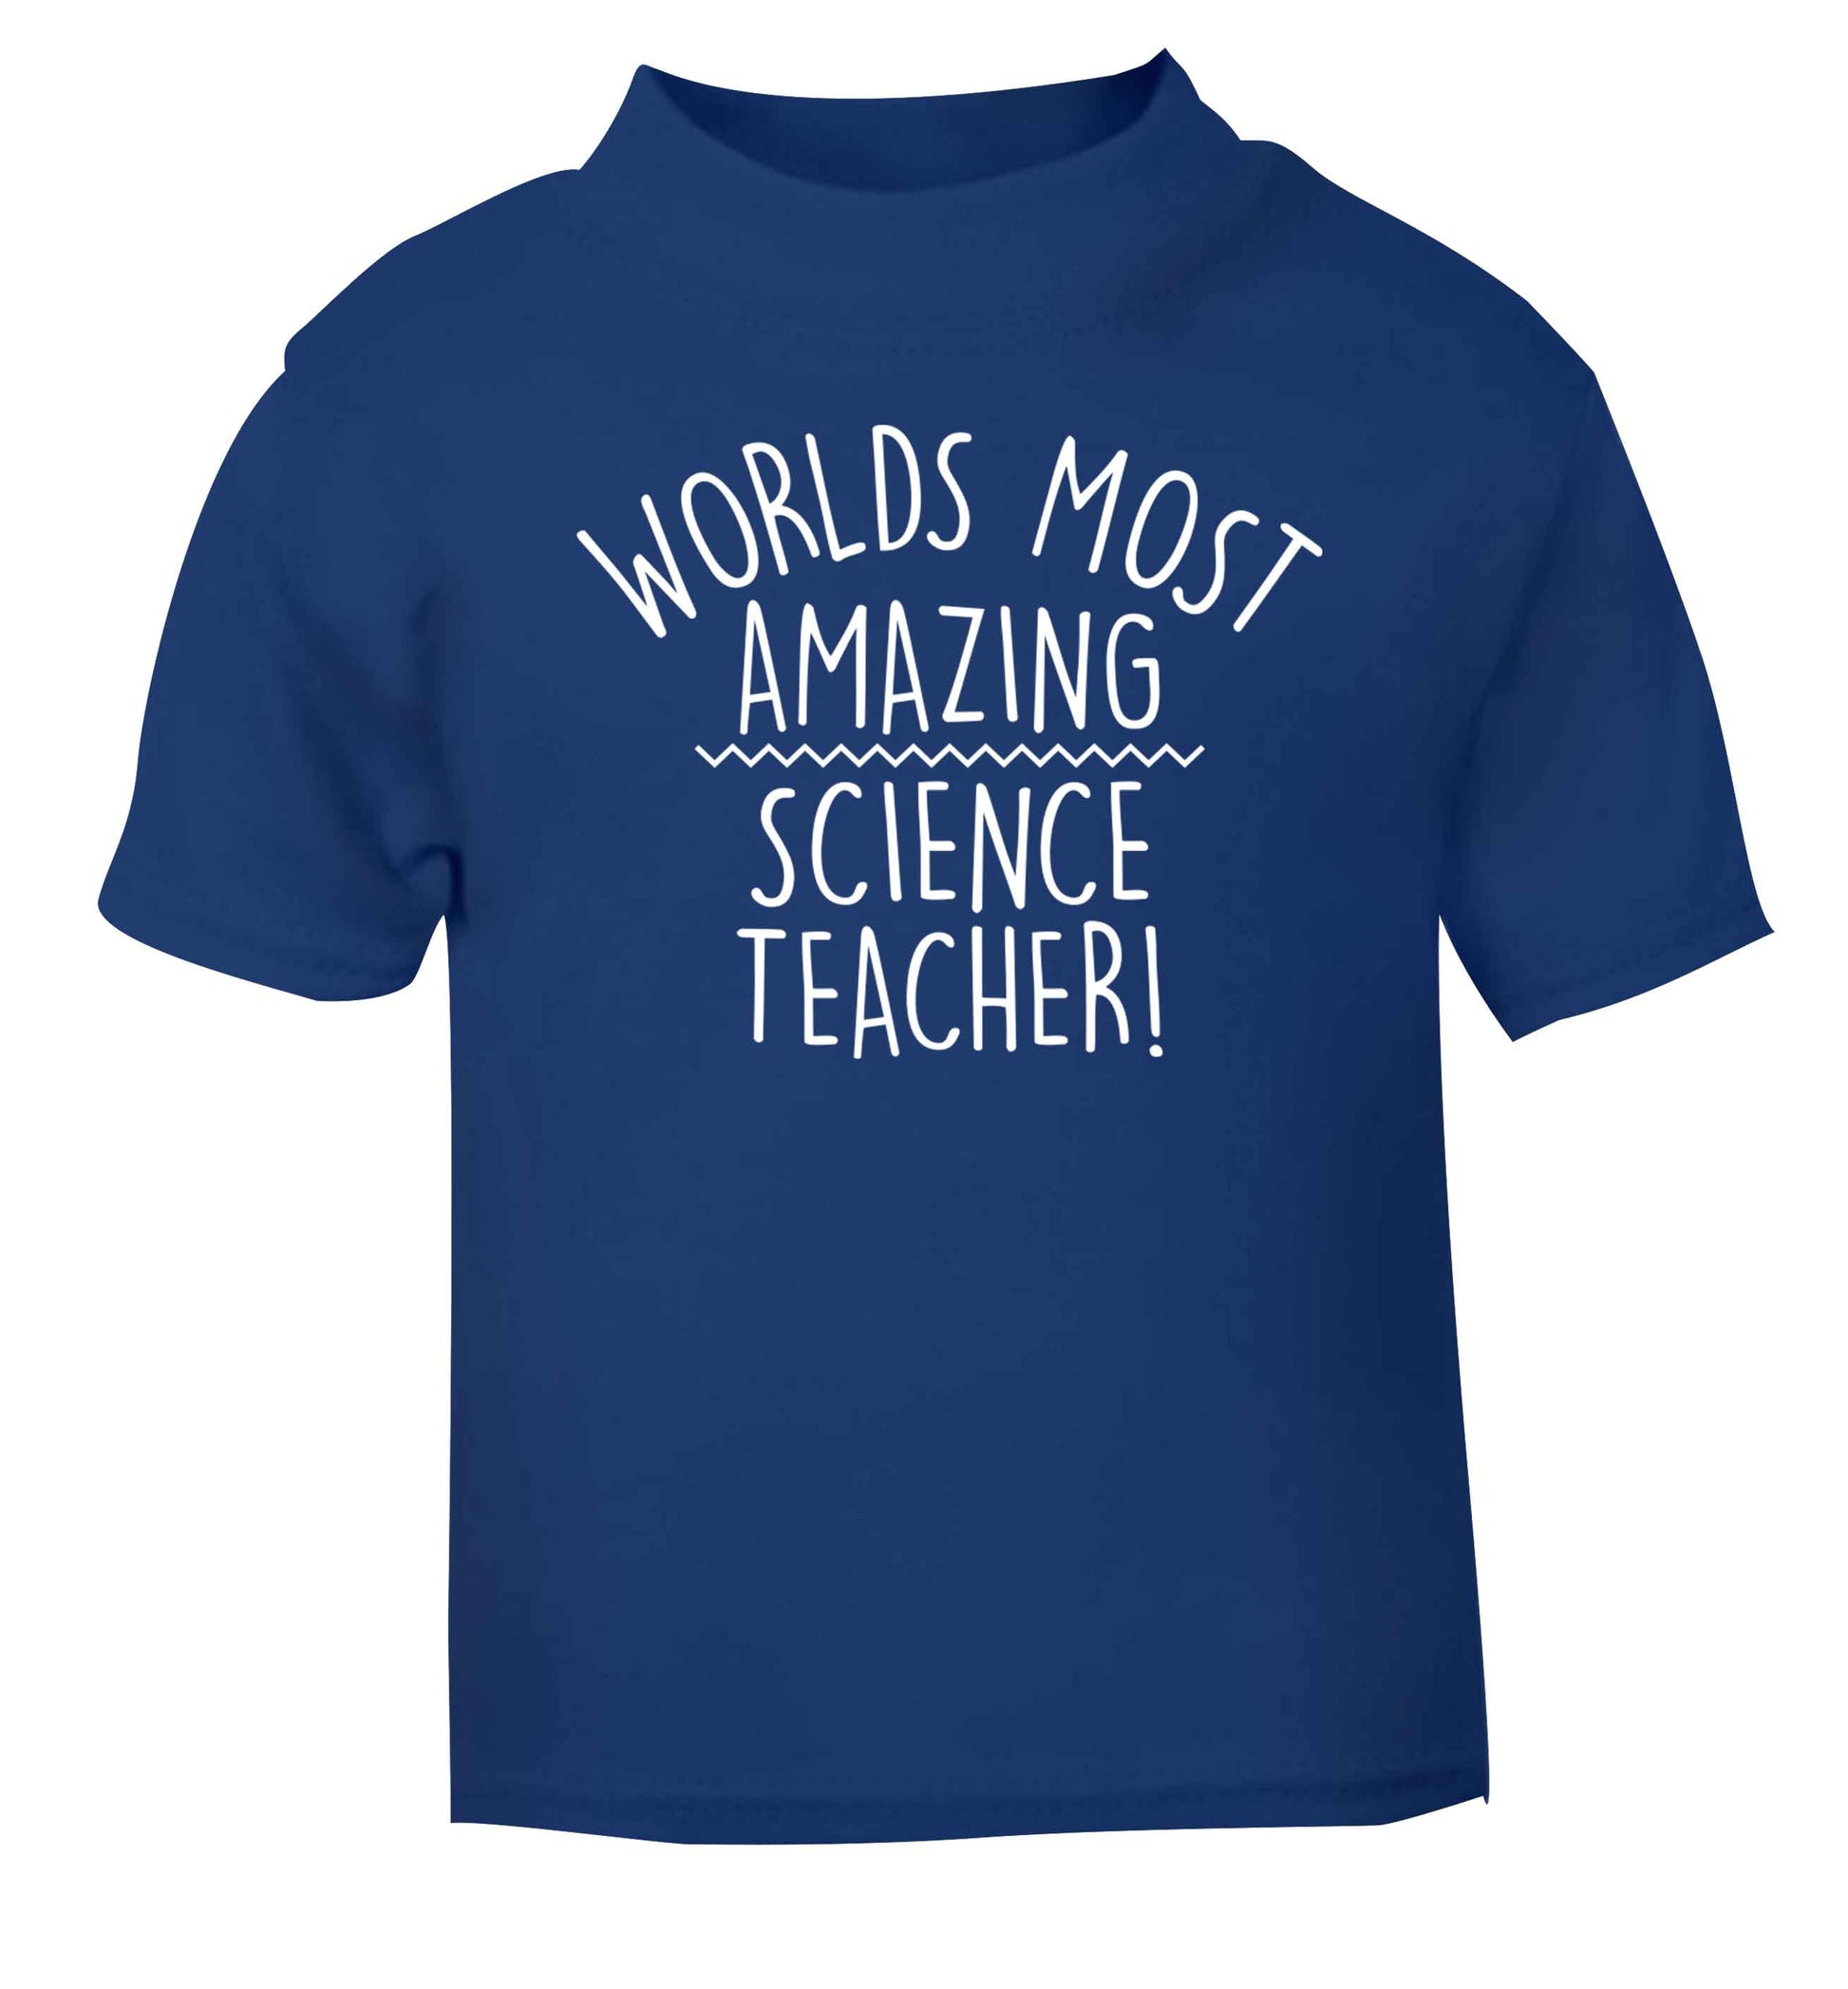 Worlds most amazing science teacher blue baby toddler Tshirt 2 Years